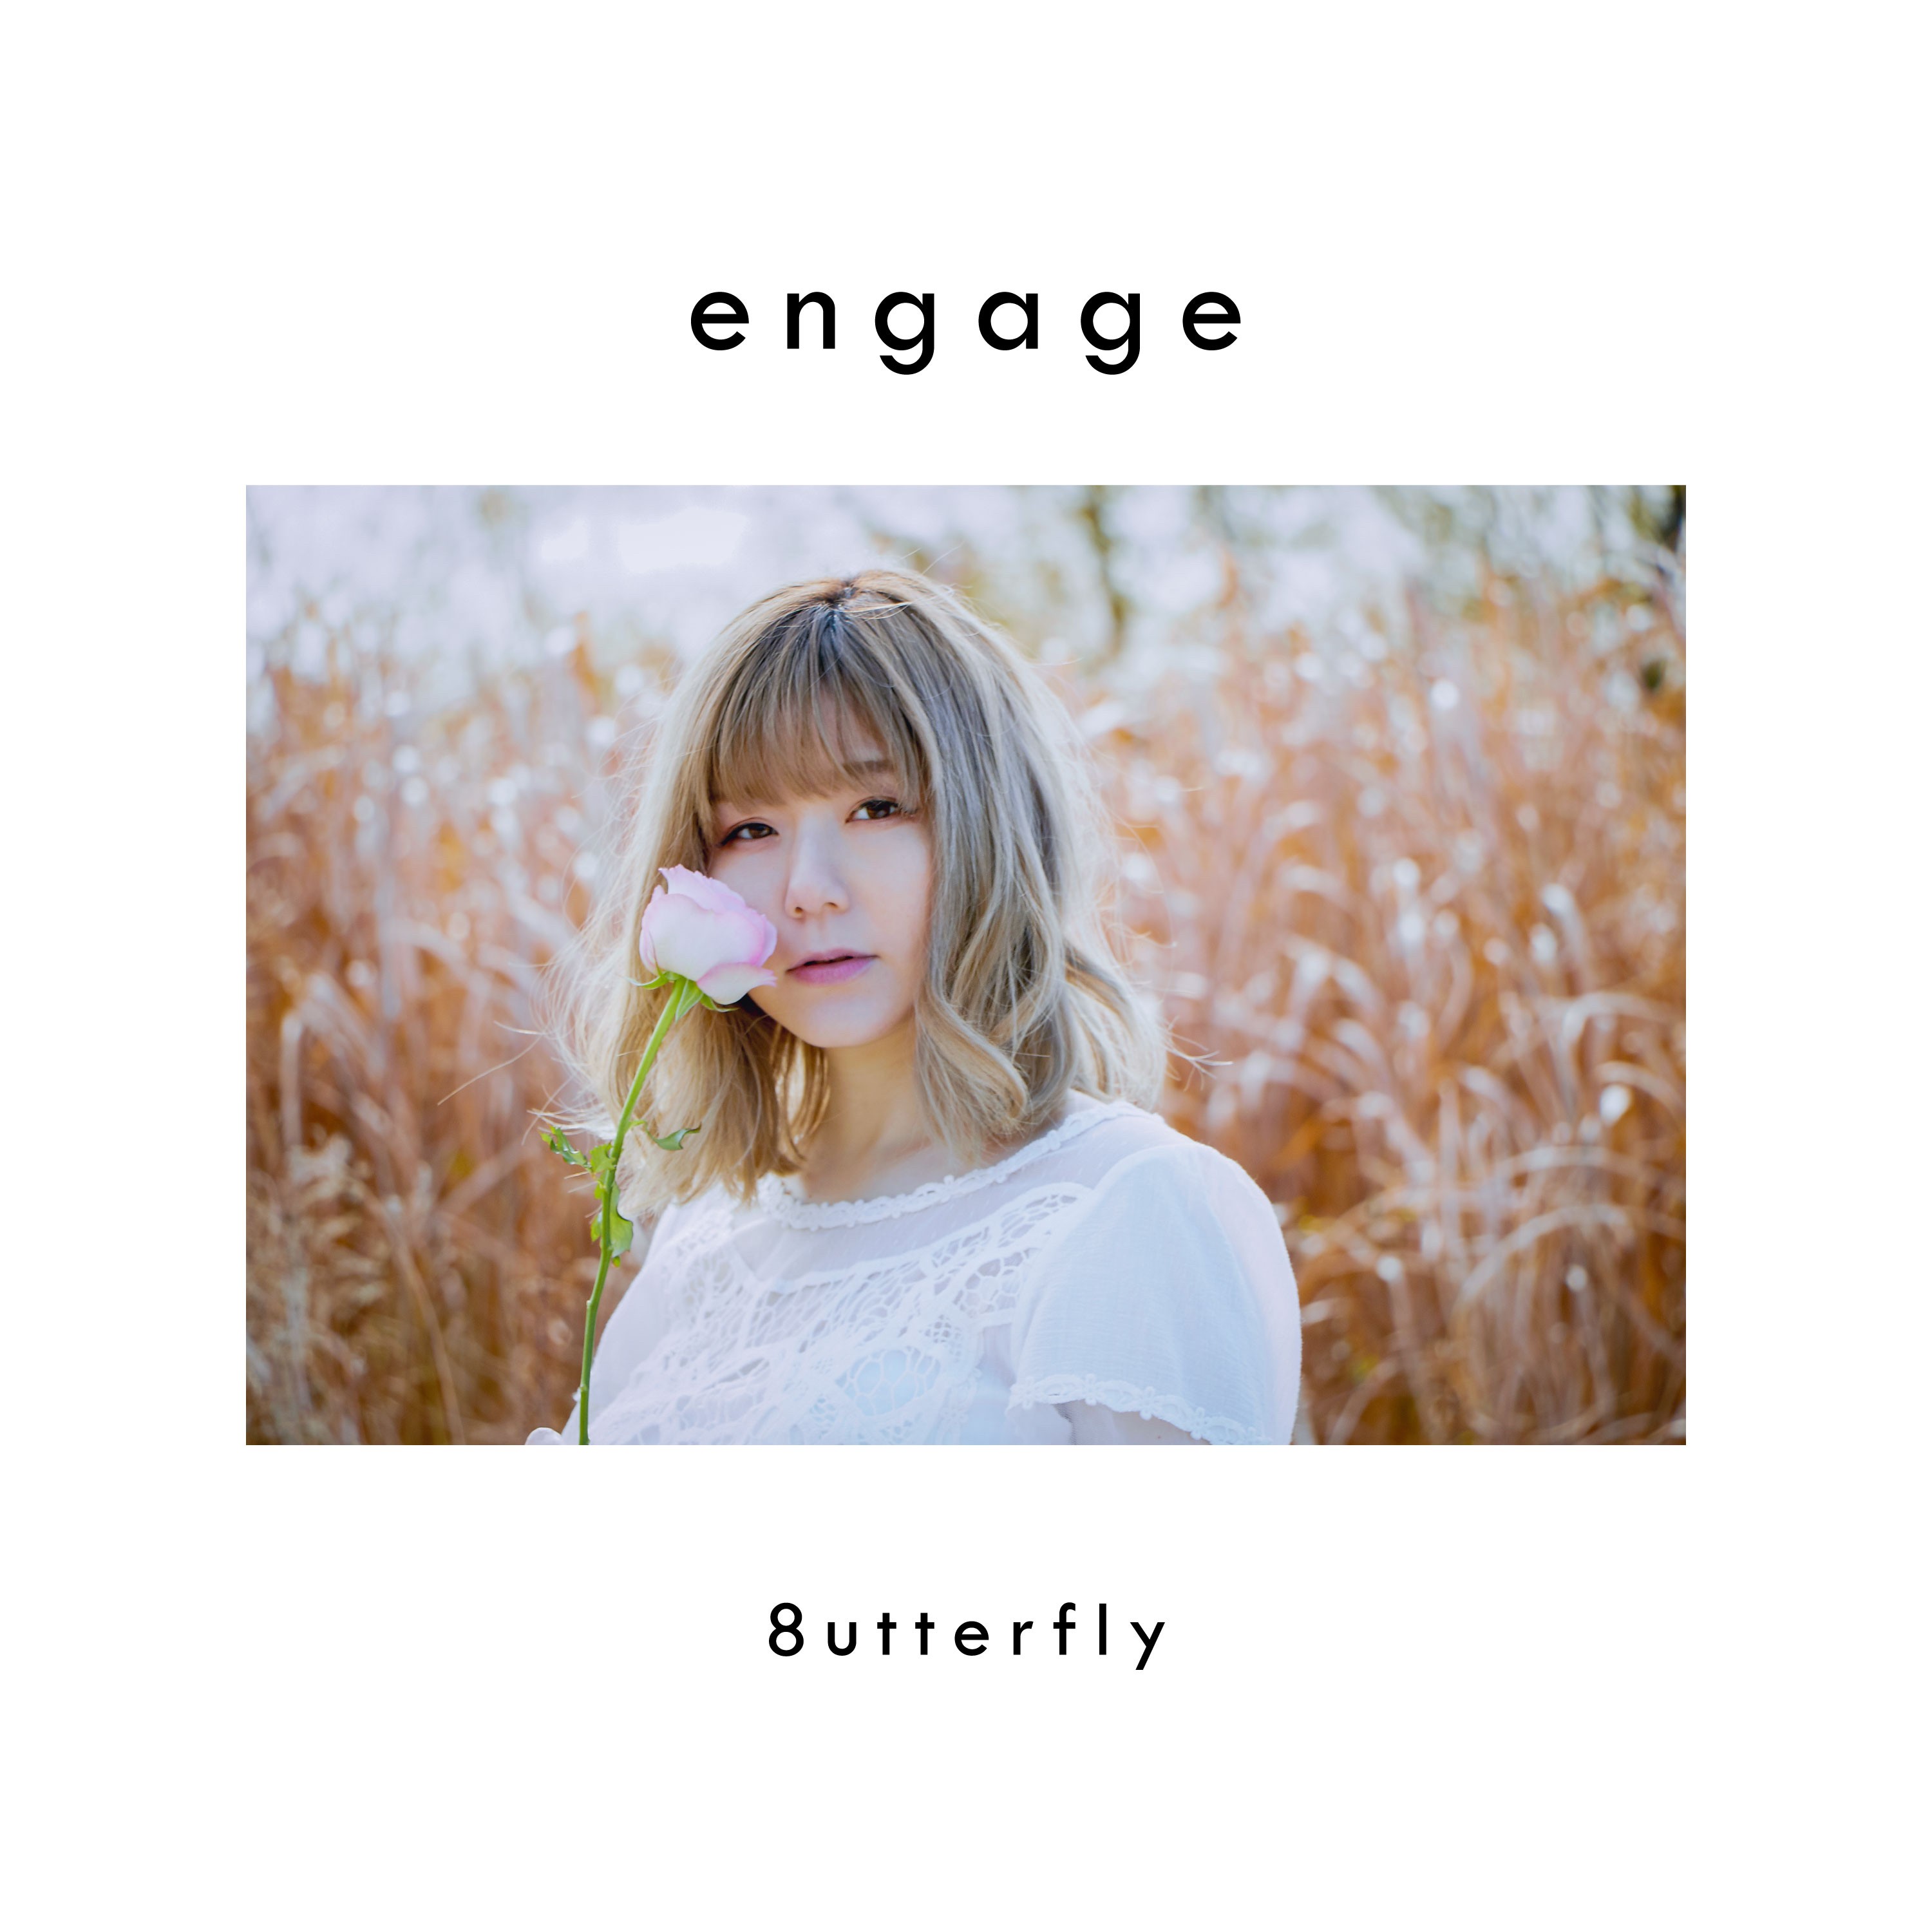 8utterfly - engage (2019-02-13) [FLAC 24bit/48kHz] Download